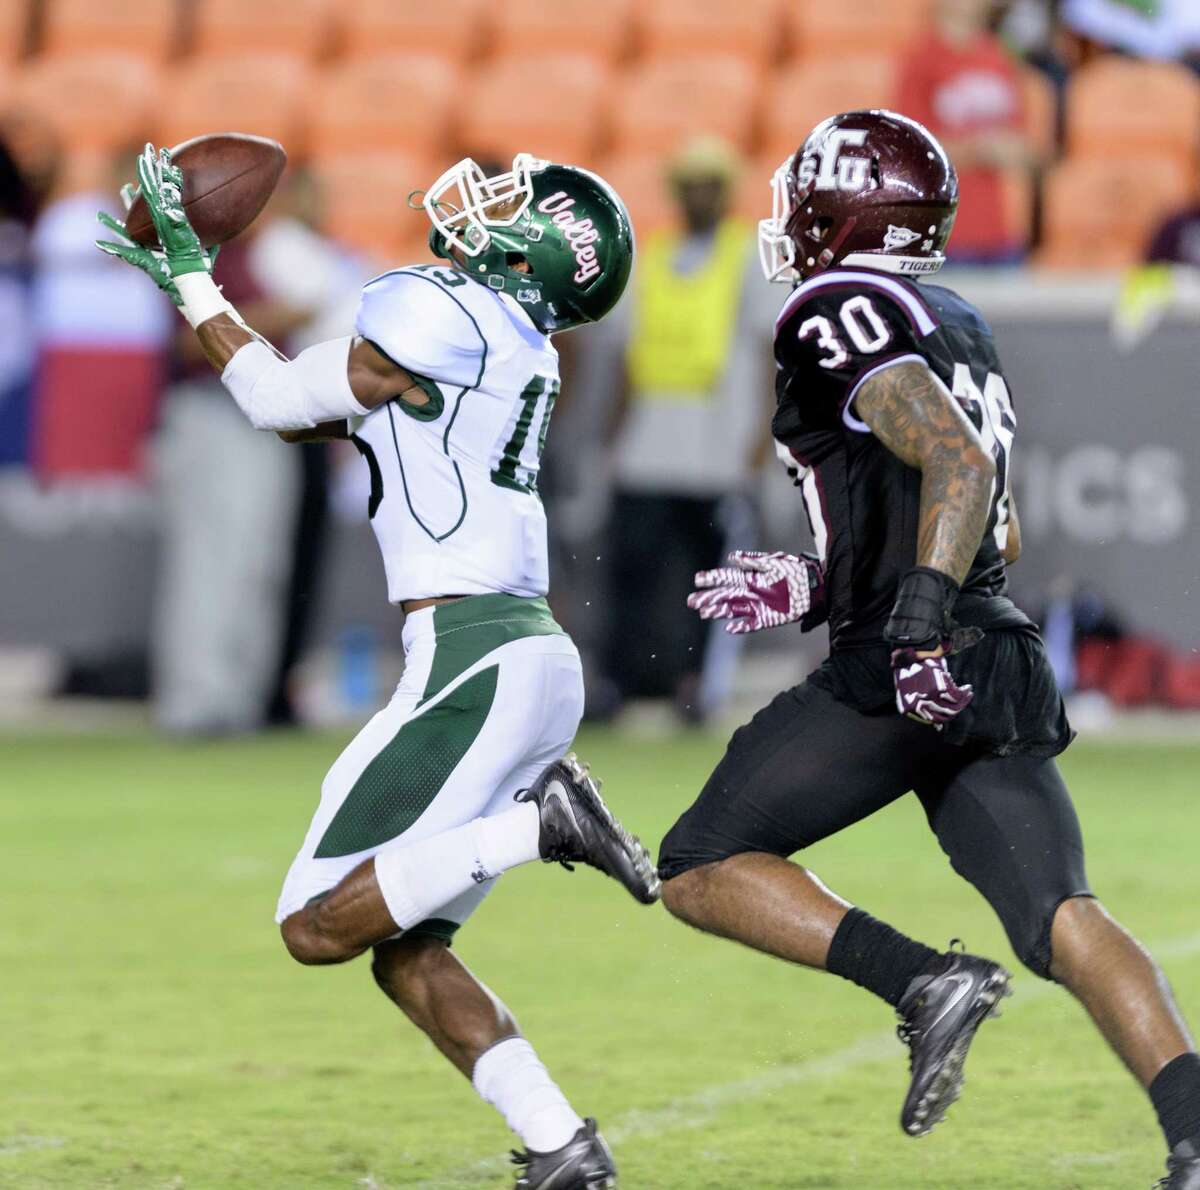 Grant Simms (15) of the Mississippi Valley State Devils bobbles a pass in the second half against the TSU Tigers in a SWAC college football game on Saturday, September 17, 2016 at BBVA Compass Stadium in Houston Texas.